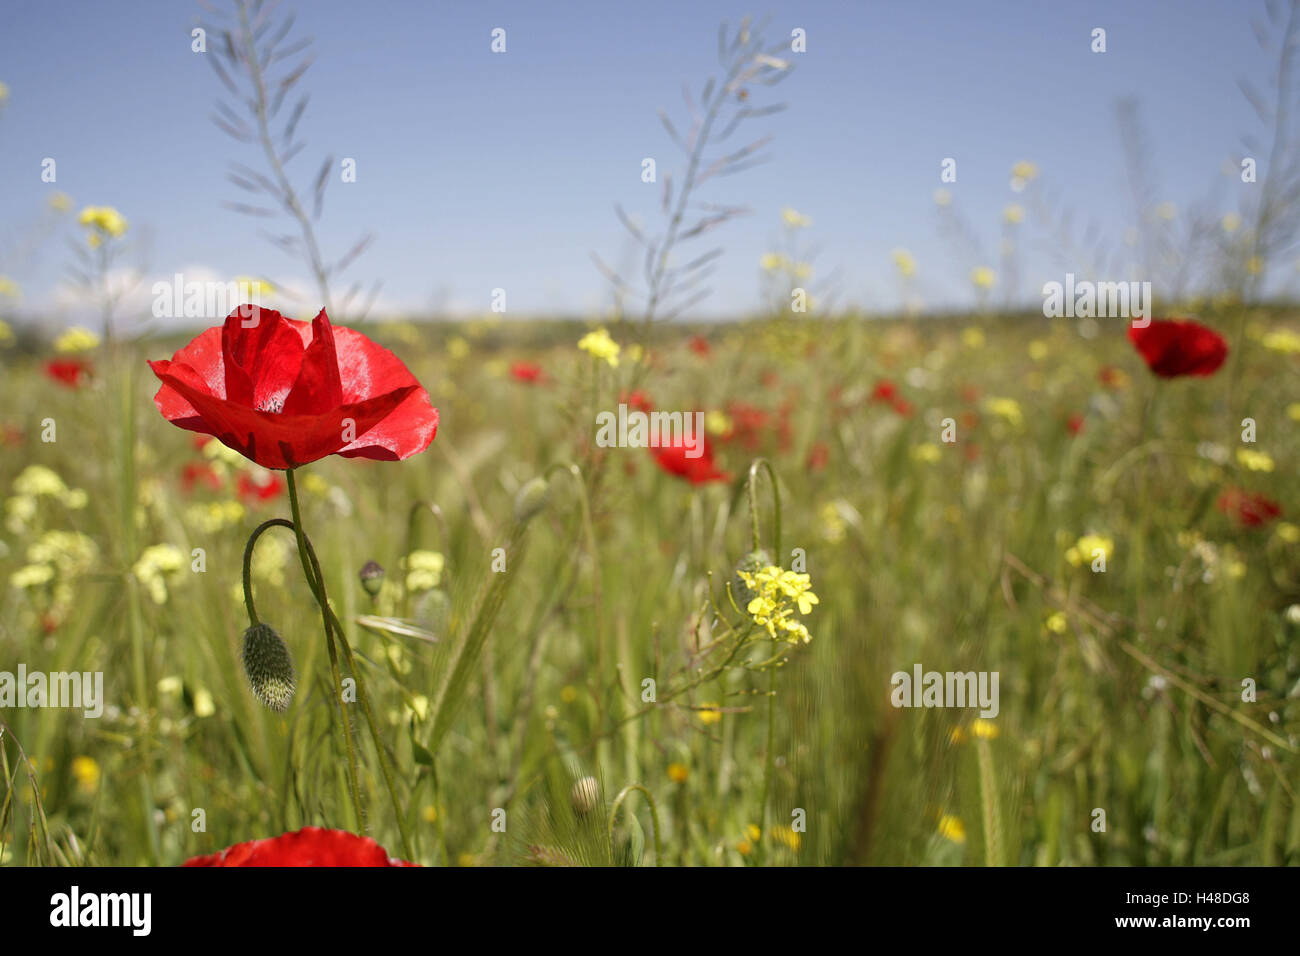 Spain, meadow, spring, nature, trees, spring meadow, wild flower meadow, wild flowers, flower meadow, flowers, poppies, clap poppy seed, blossom, grass, season, springlike, nobody, nature, scenery, Stock Photo